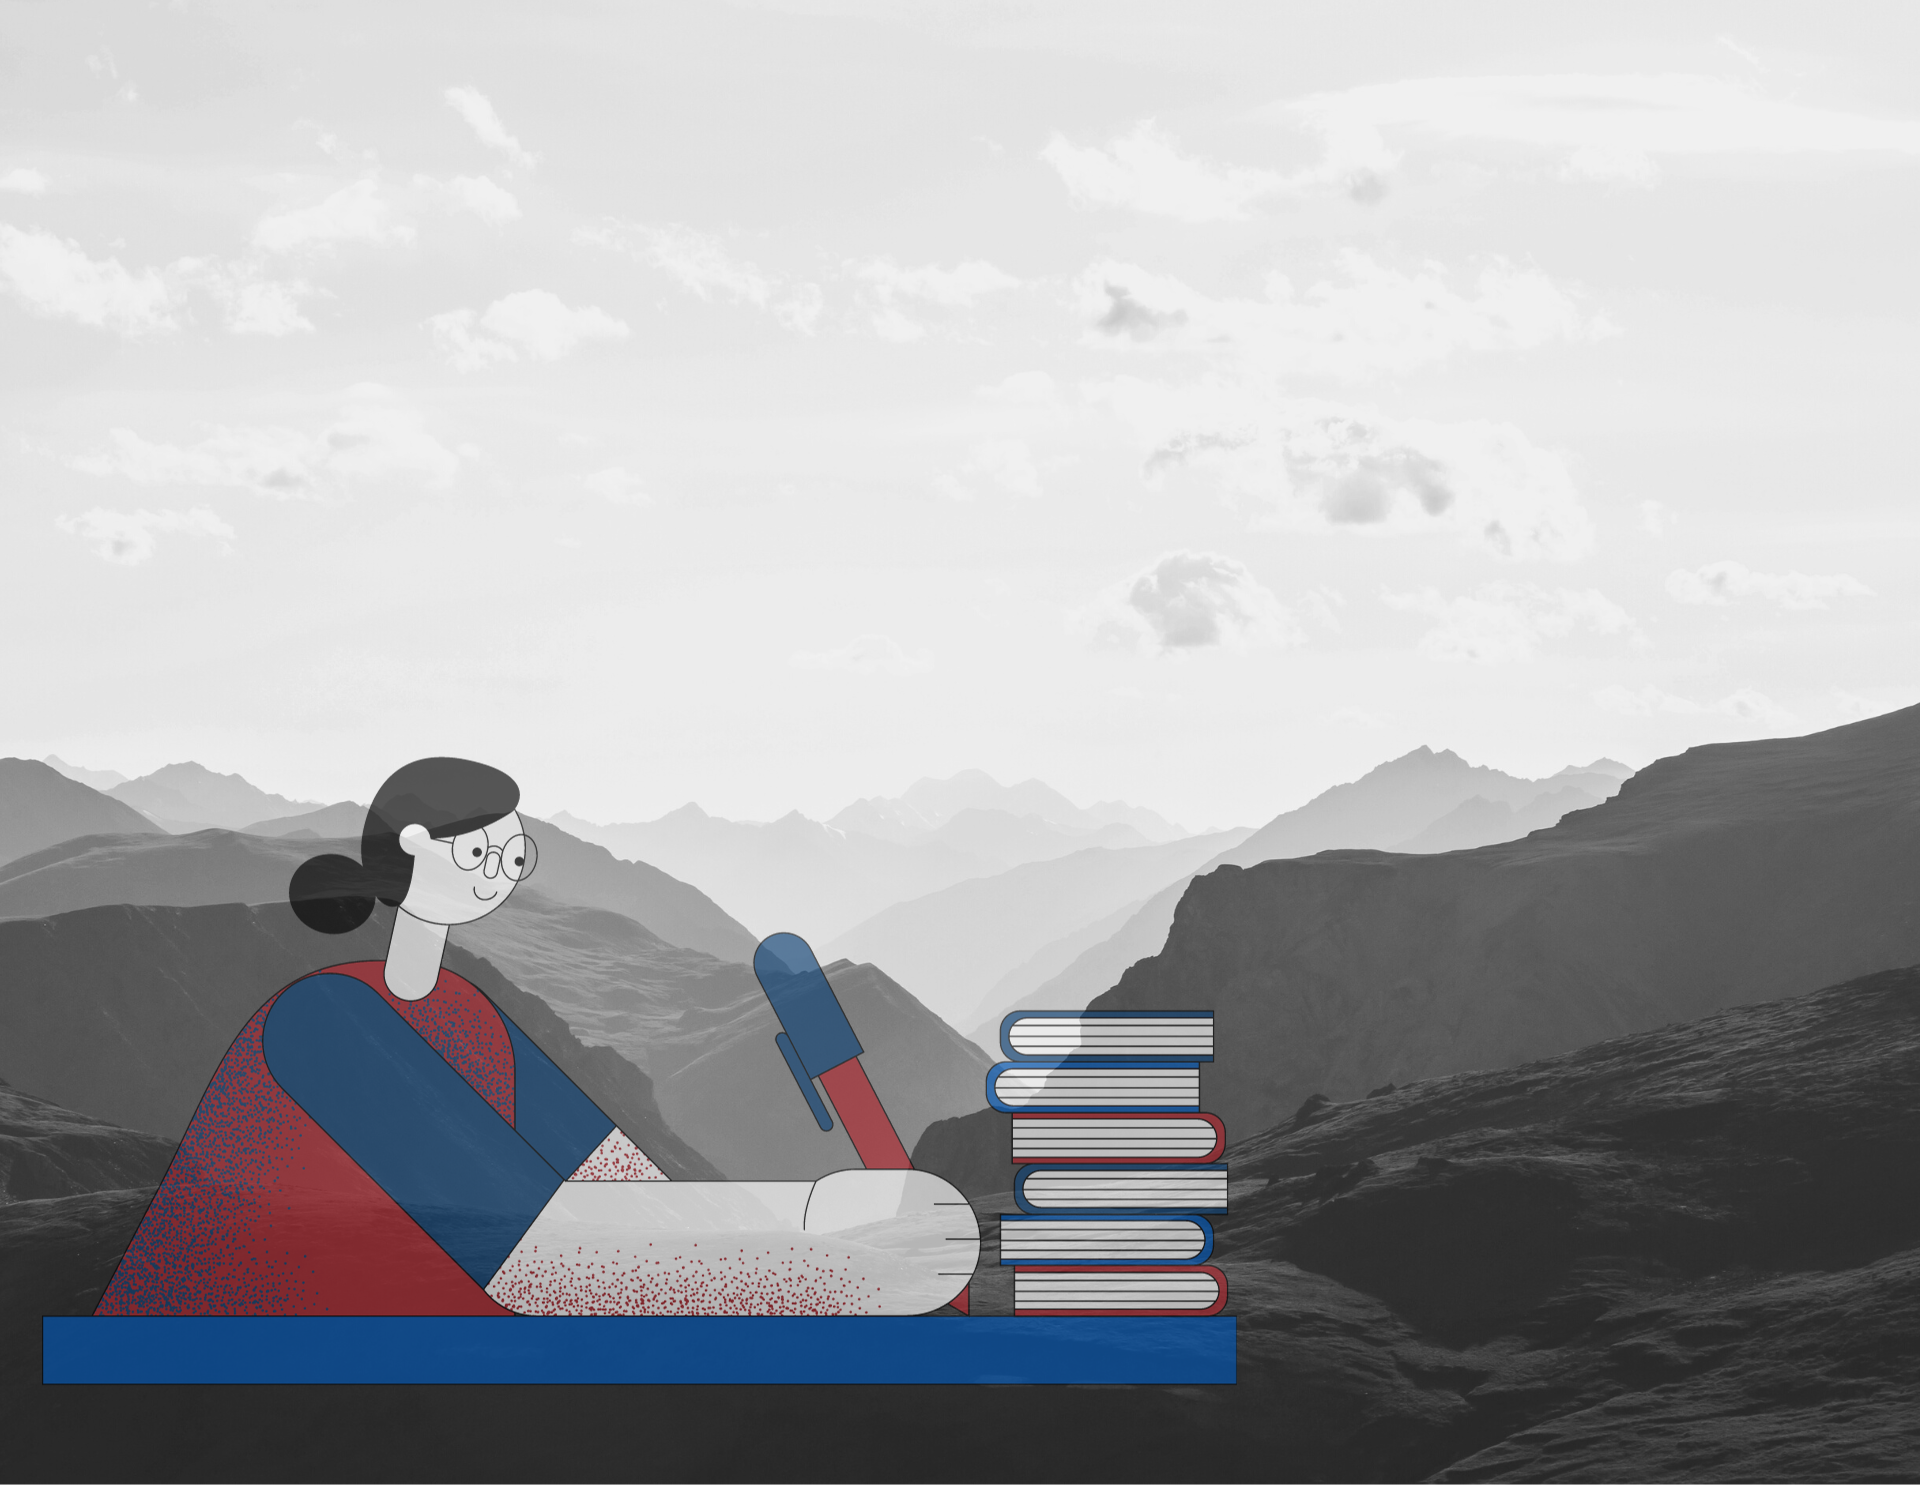 Background: mountains with a black and white filter. Foreground: A cartoon of a woman sitting at a desk with a large pen. A stack of books sit to her right. She wears round glasses and has black hair. The desk and book colors are in blue, red, black, and white.